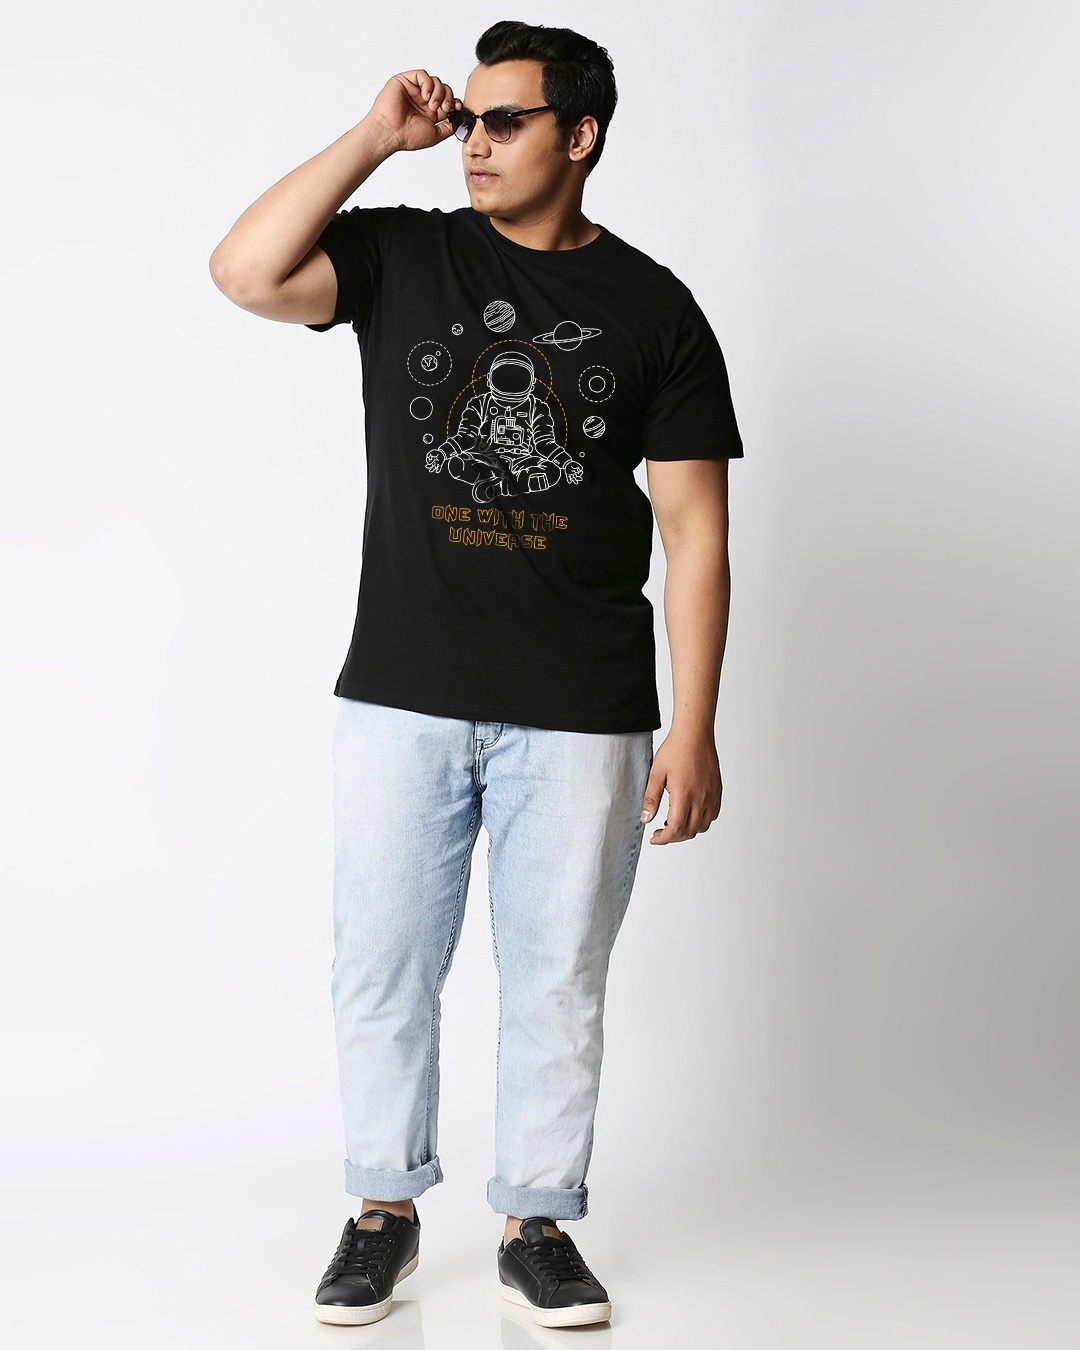 Shop Men's Black One With The Universe Graphic Printed Plus Size T-shirt-Design